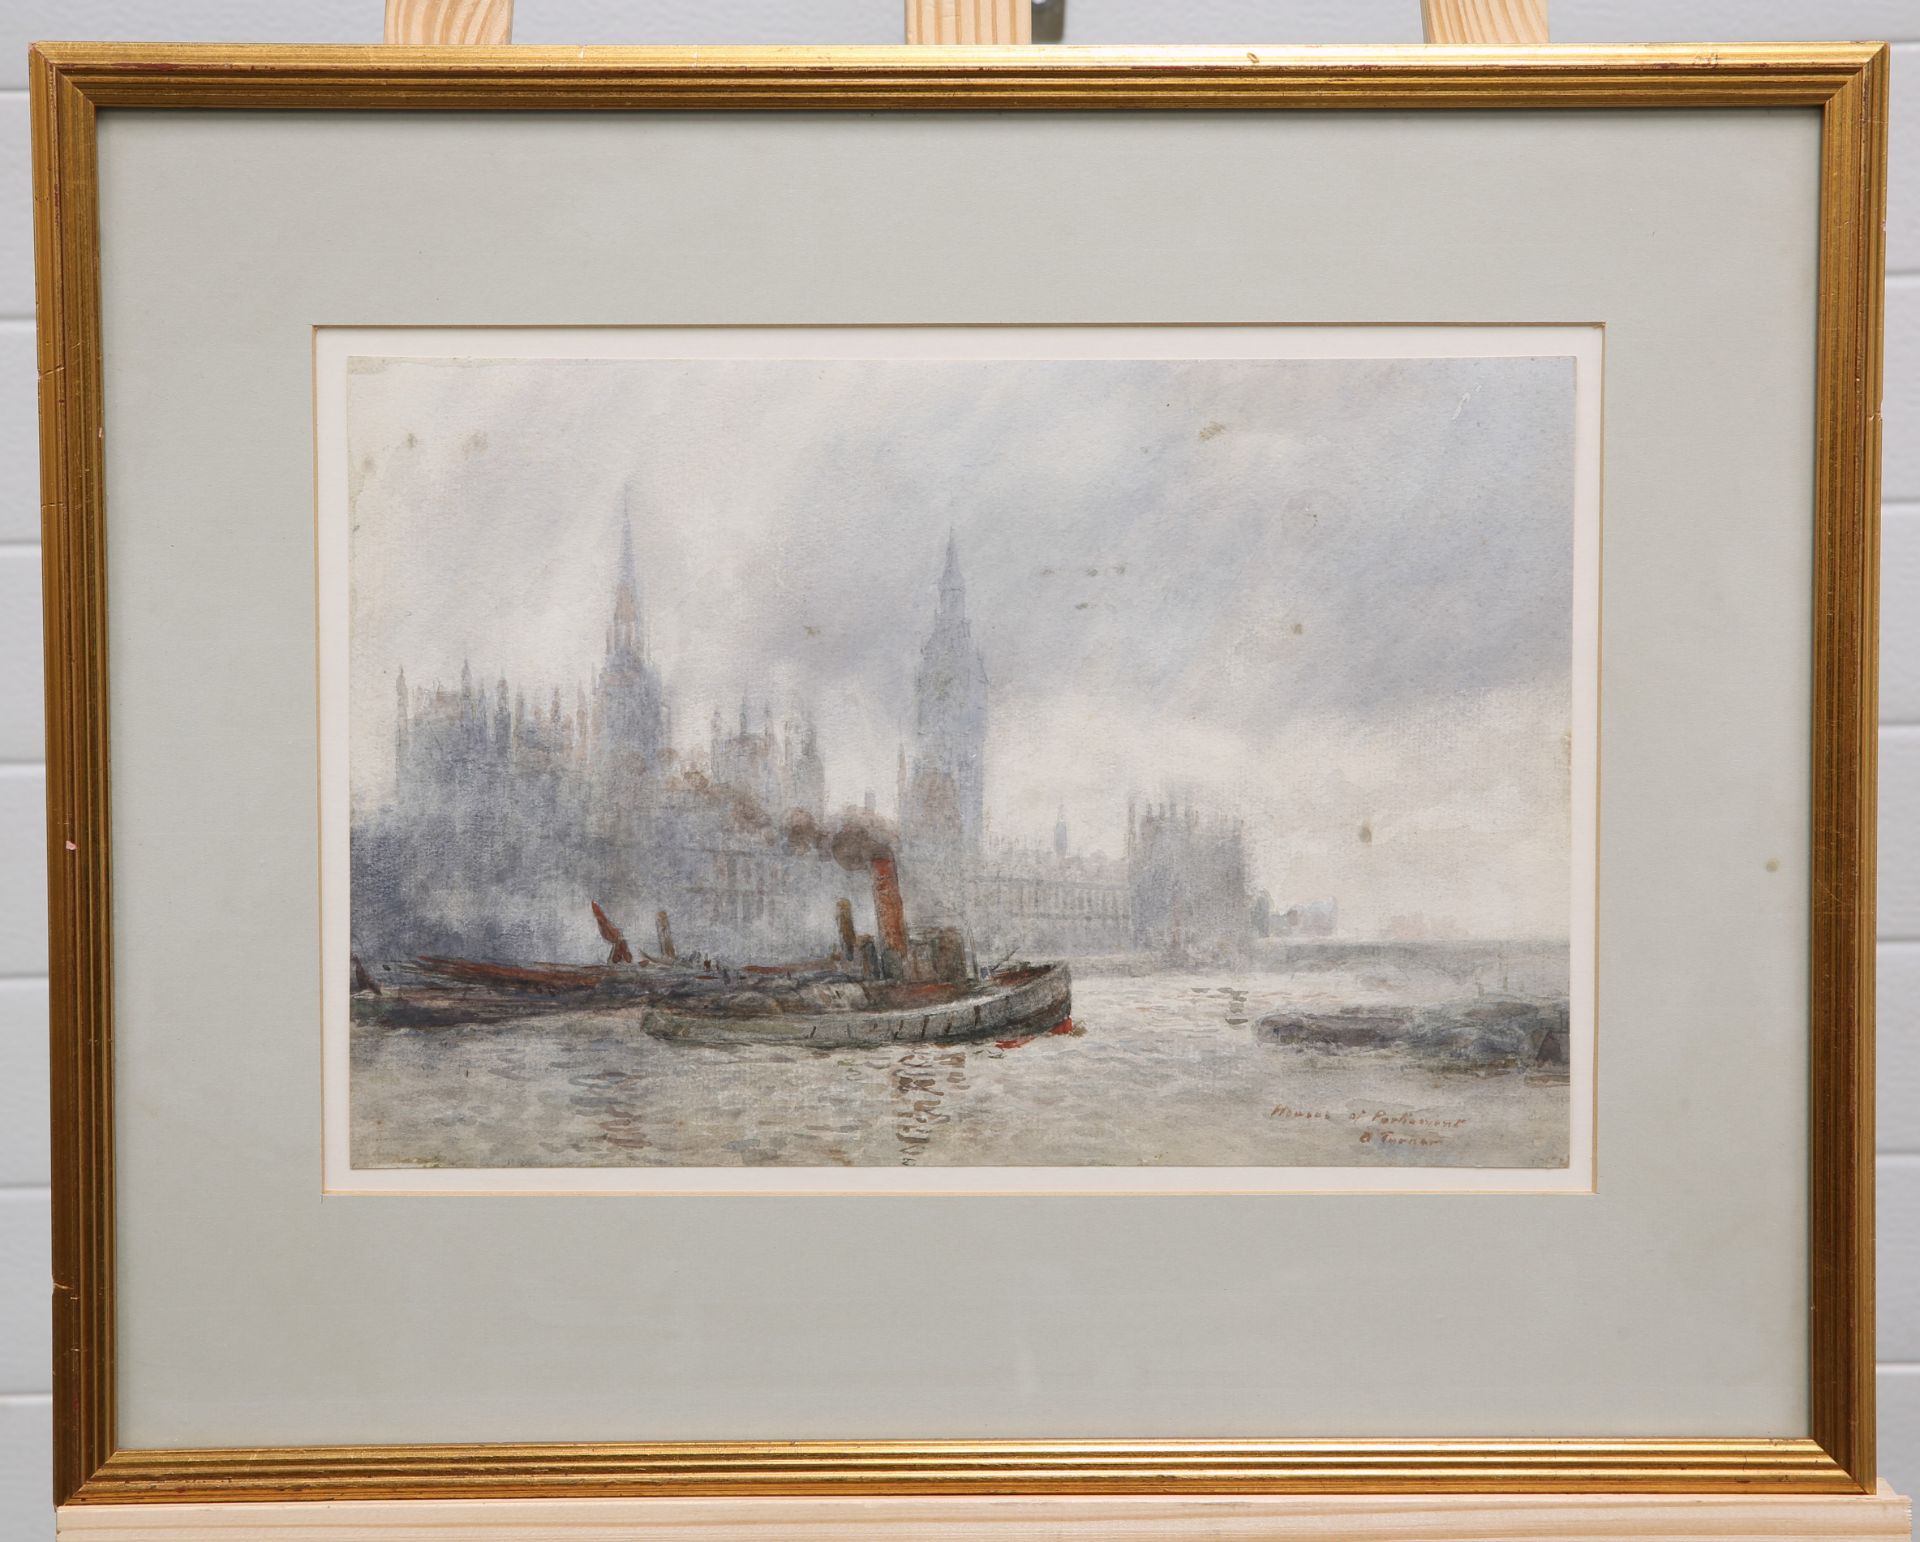 A*** TURNER, "HOUSES OF PARLIAMENT" - Image 2 of 2